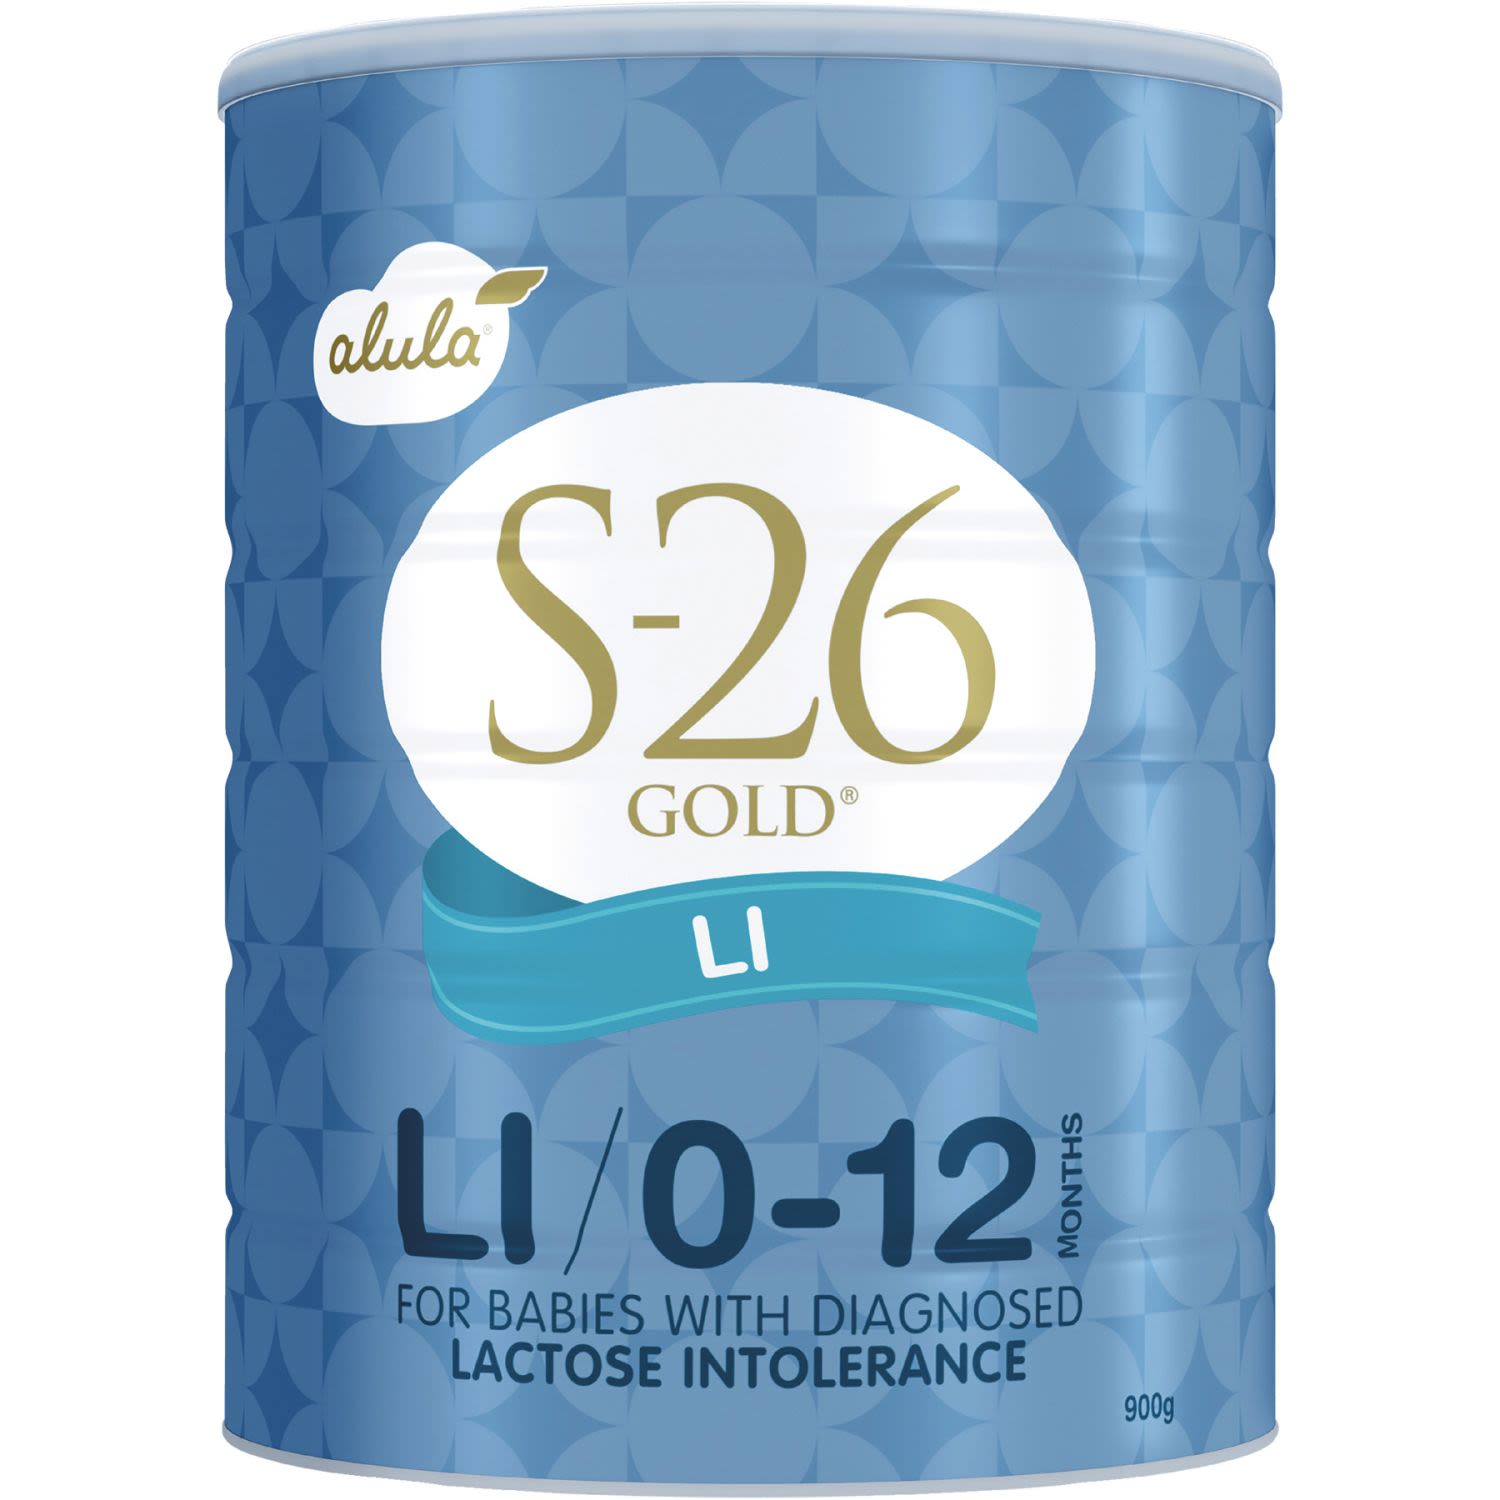 S-26 Alula Gold LI is a premium, nutritionally complete, specialty infant formula for babies from birth who are lactose intolerant or unable to properly digest lactose. The protein source of S-26 Alula Gold LI infant formula is whey protein concentrate and cow's milk protein isolate.

It continues to support your baby through the time when solids are being introduced at around 6 months, as a well-balanced diet is important.

As it is a specialty formula, consultation with a healthcare professional is recommended before use to ensure S-26 Alula Gold LI is suitable for your baby.

Not suitable for infants with cow’s milk protein allergy or galactosaemia or those requiring a galactose-free diet.
Not suitable for general use and should be used under medical supervision.
<br /> <br /> <br /><br />Country of Origin: Mexico